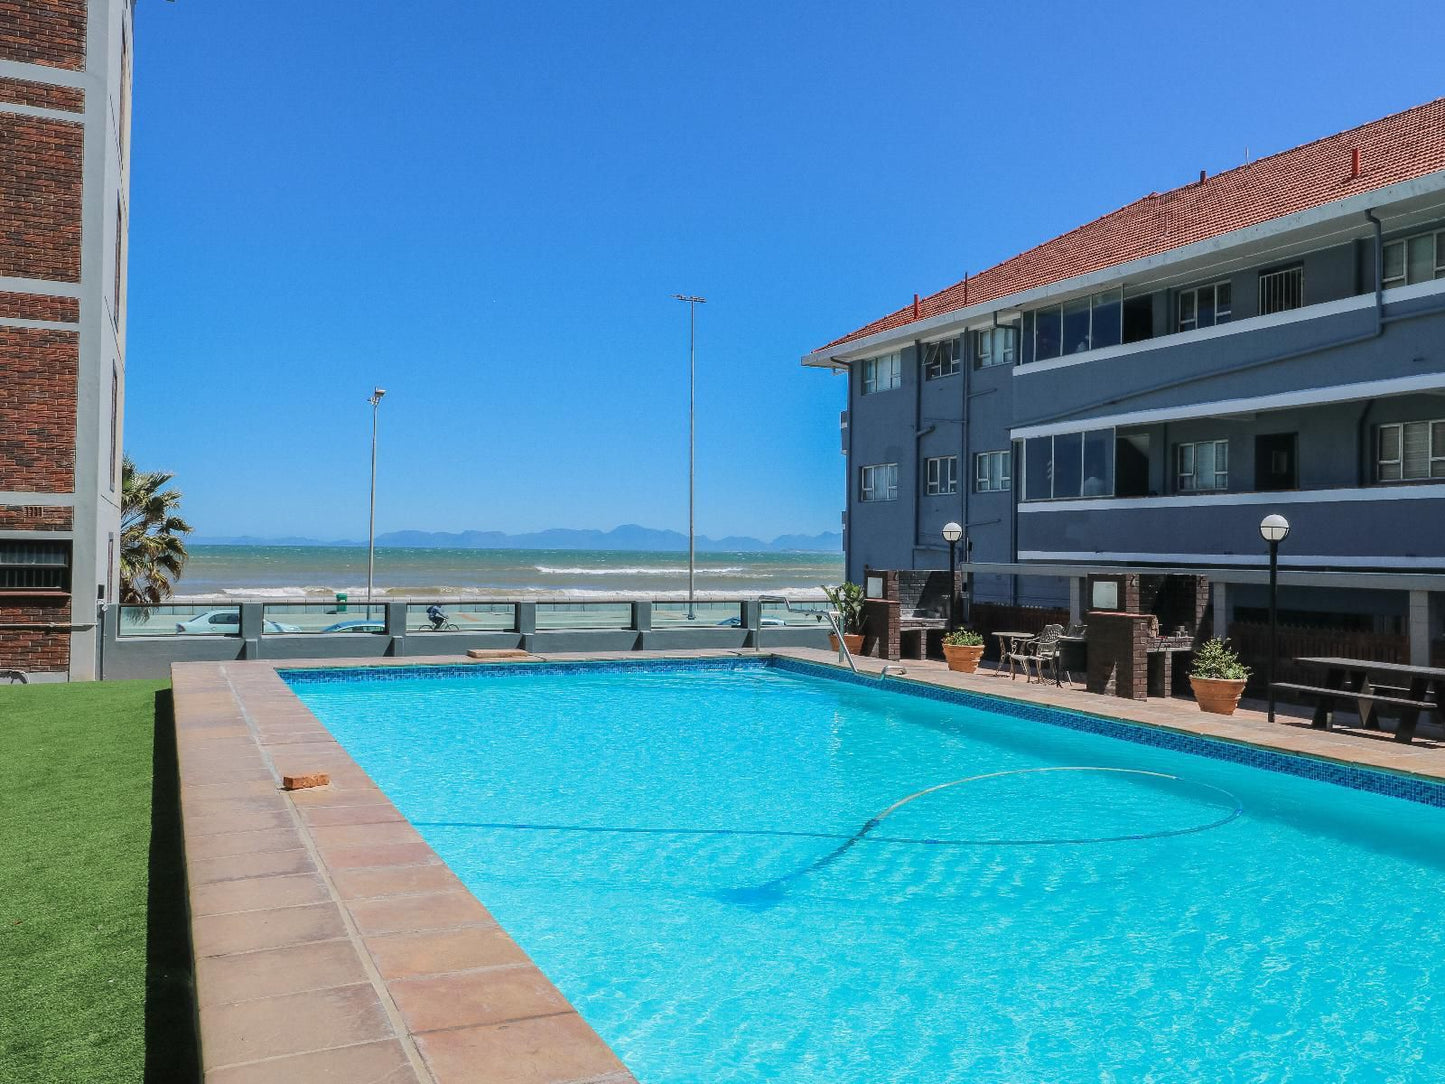 Just Property Strand Western Cape South Africa Beach, Nature, Sand, House, Building, Architecture, Swimming Pool